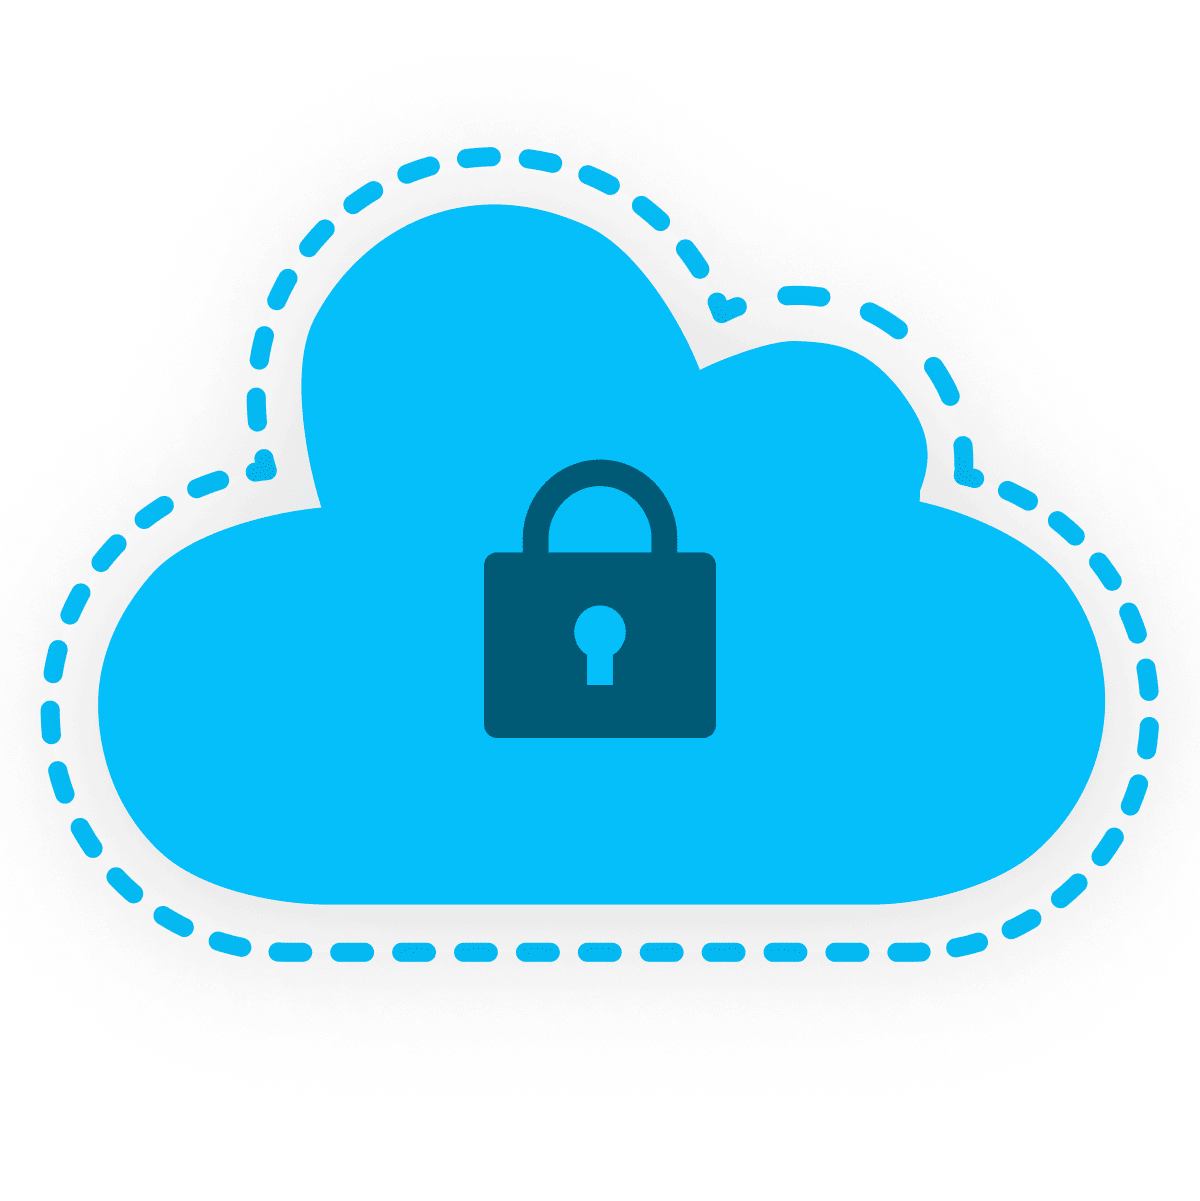 Secure cloud icon with padlock